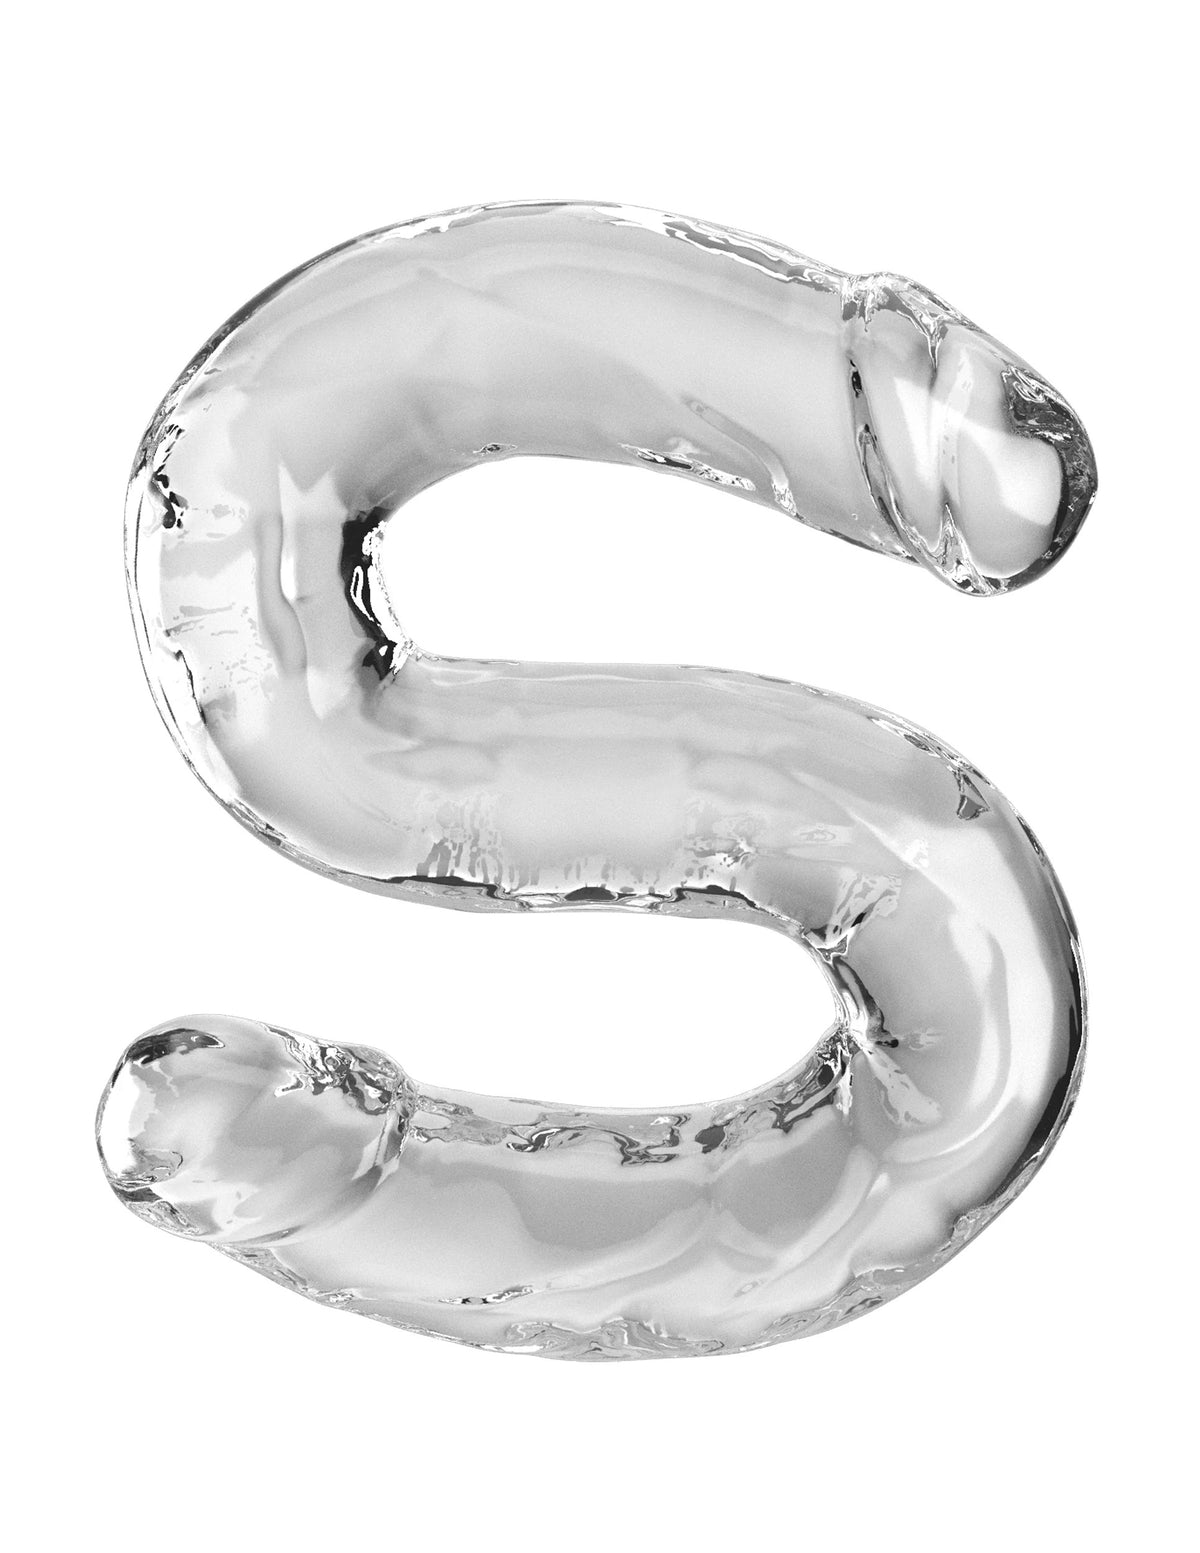 18 Inch Double Dildo - Clear